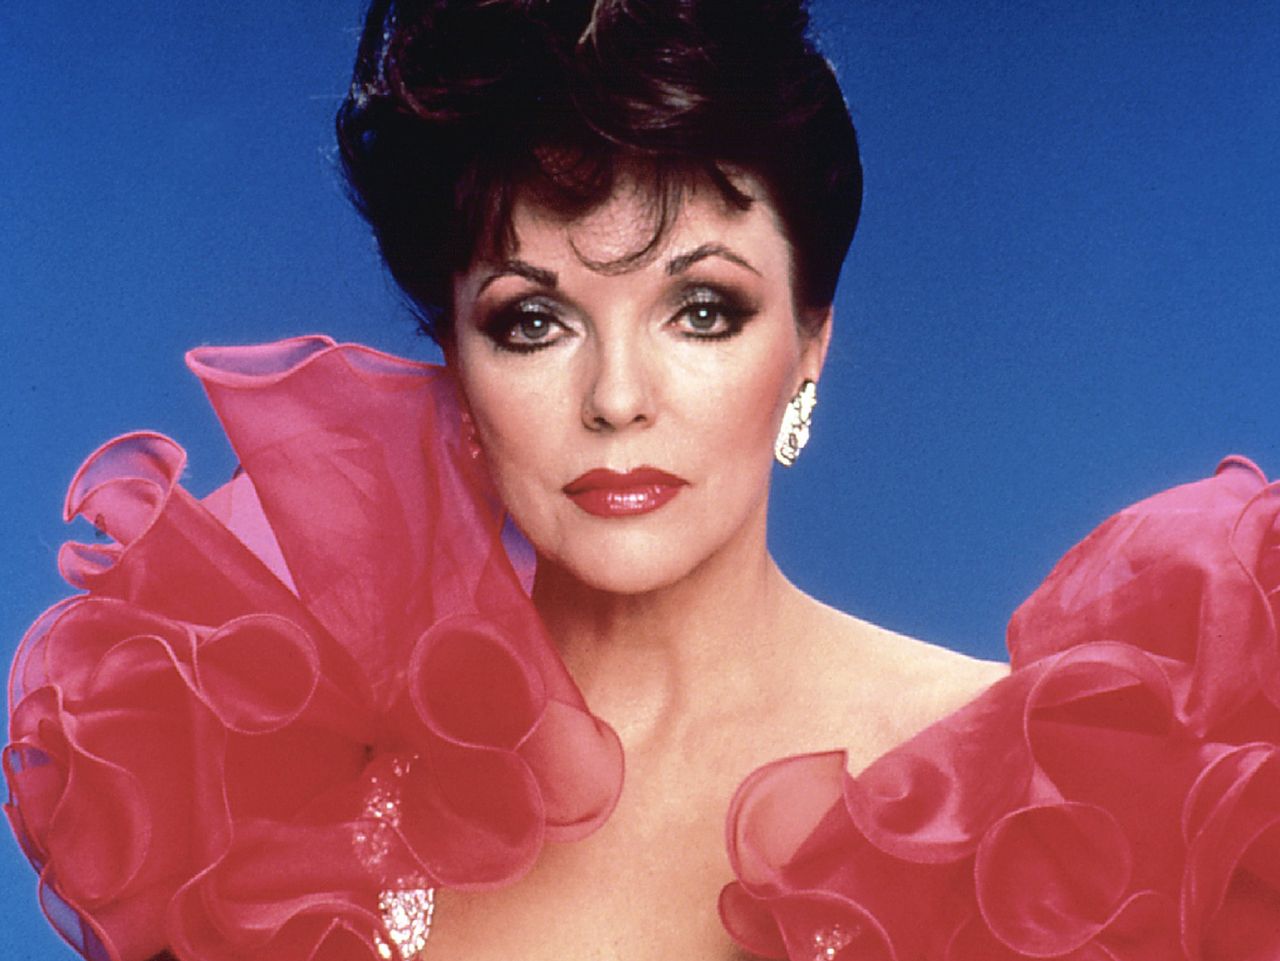 Joan Collins at 91: A life of stardom, scandal, and resilience